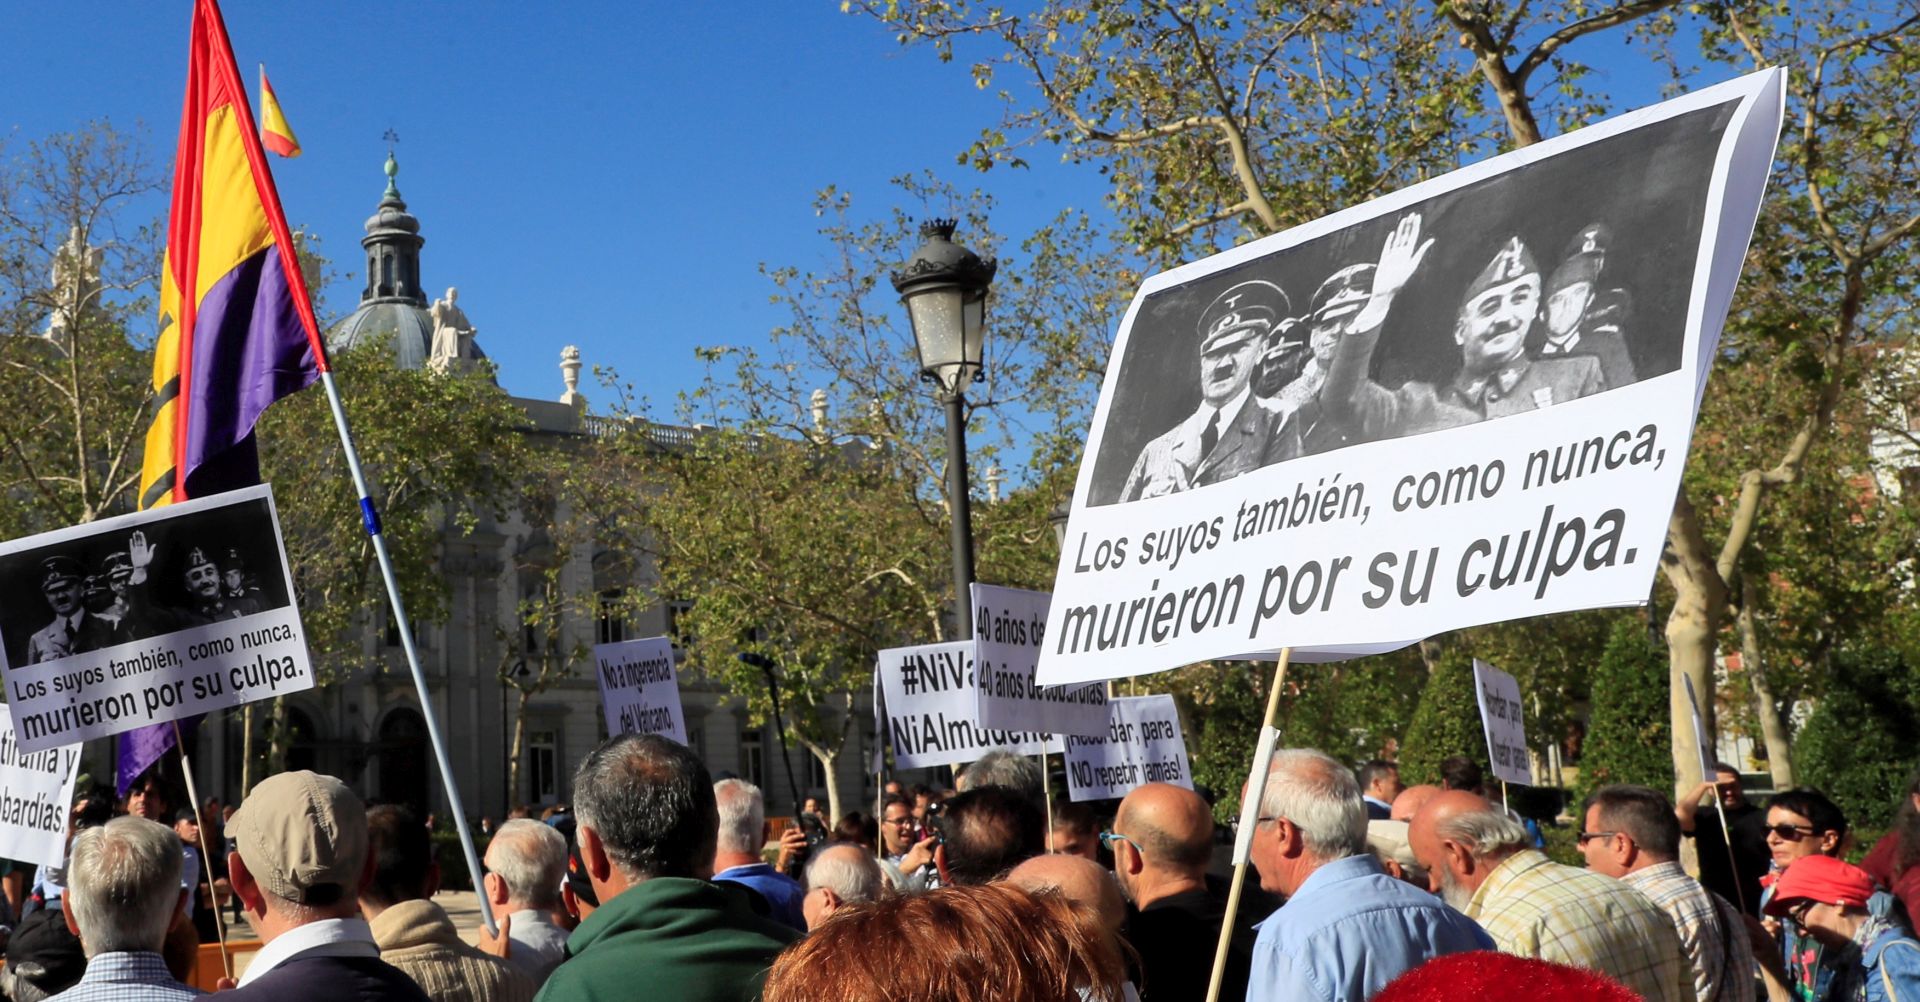 epa07865490 Protesters hold a banner with a picture of Spanish late dictator Francisco Franco (R) and German late dictator Adolf Hitler (L) that reads 'Their people also died because of their fault' during a protest at the Supreme Court in Madrid, Spain, to support the Government's decision of exhuming Franco's remains. The Supreme Court has endorsed a Royal Decree passed by the socialist Government, 24 August 2018, to modify the Spanish Historic Memory Law in order to allow the exhumation of Spanish dictator Francisco Franco's body from the memorial. El Valle de los Caidos is a controversial memorial complex that Franco decided to build back in 1940 to bury soldiers of the Nationalist faction fallen during the Civil War. It was years later, before its opening, when it was decided that soldiers from both sides should be buried at the memorial that was finally finished in 1959. Franco has been buried at the memorial since his death in 1975. According to the Supreme Court's ruling, Franco will have to be buried in a cemetery near Madrid, against his family's will that had the intention of burying him in the Spanish capital's city center.  EPA/Fernando Alvarado